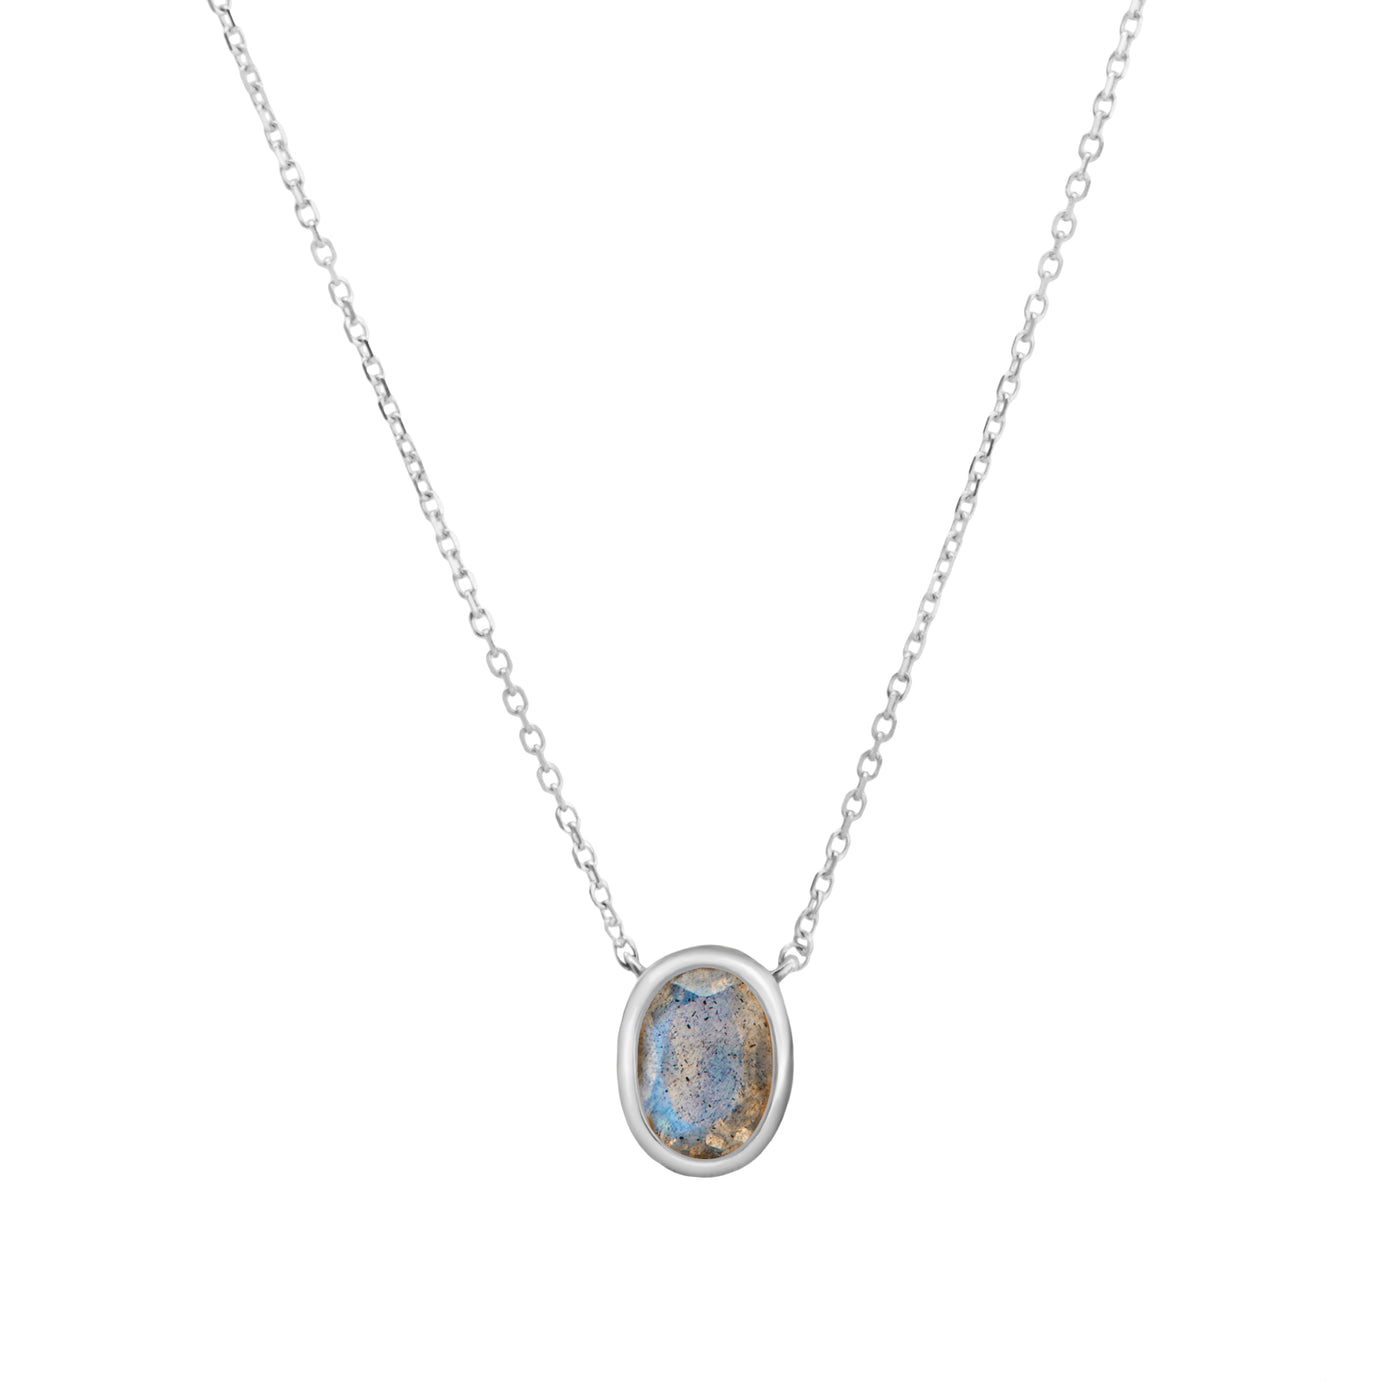  14 Karat White Gold Necklace with Oval Shaped Labradorite Stone Against White Background